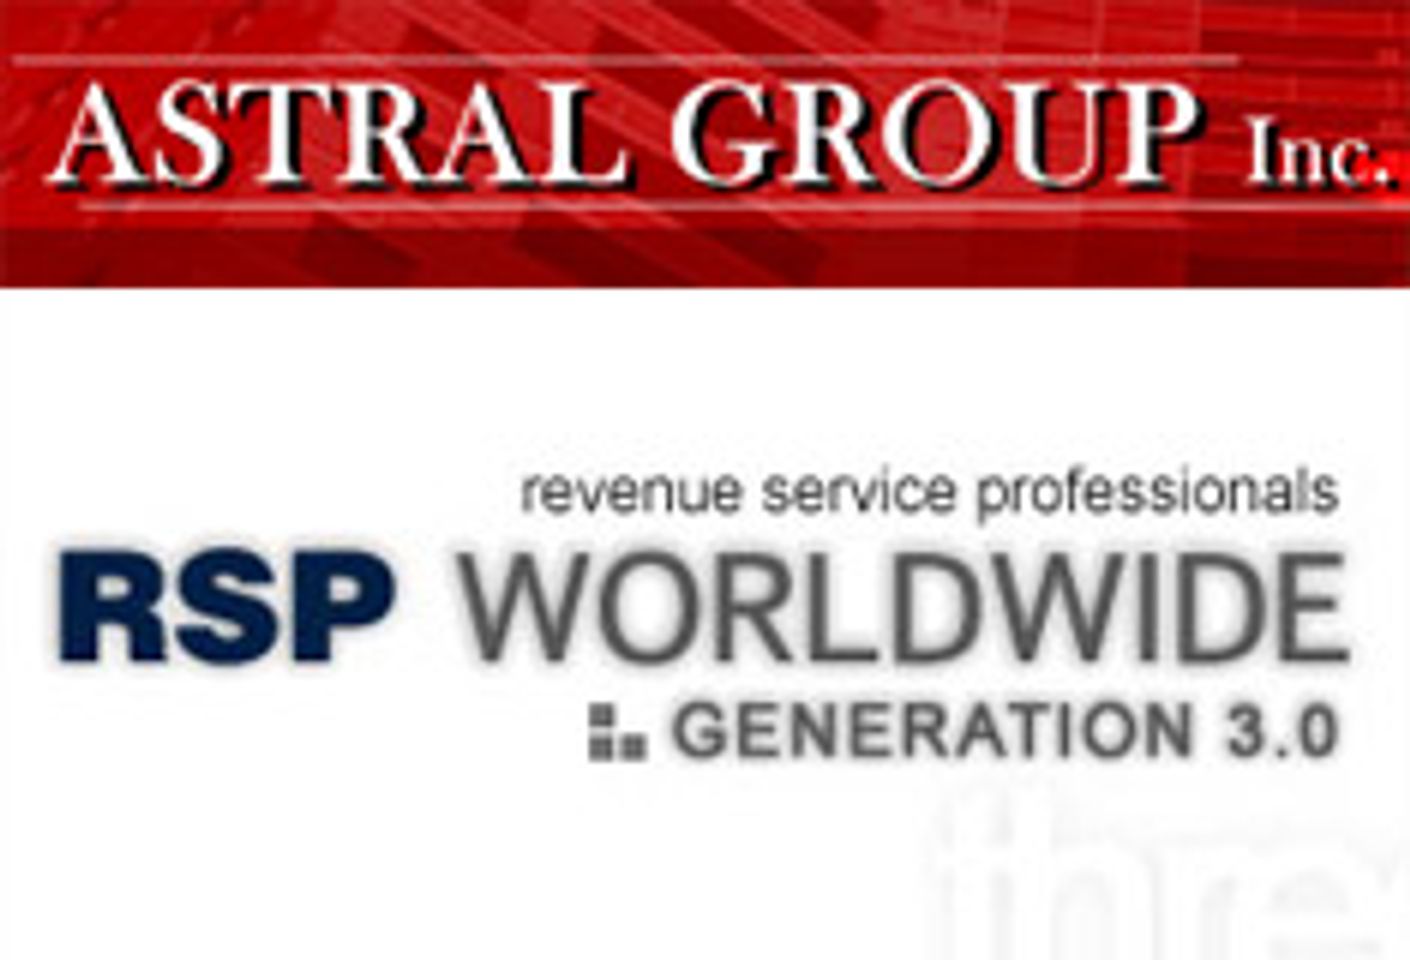 RSP WorldWide and Astral Group Inc Announce Joint Venture